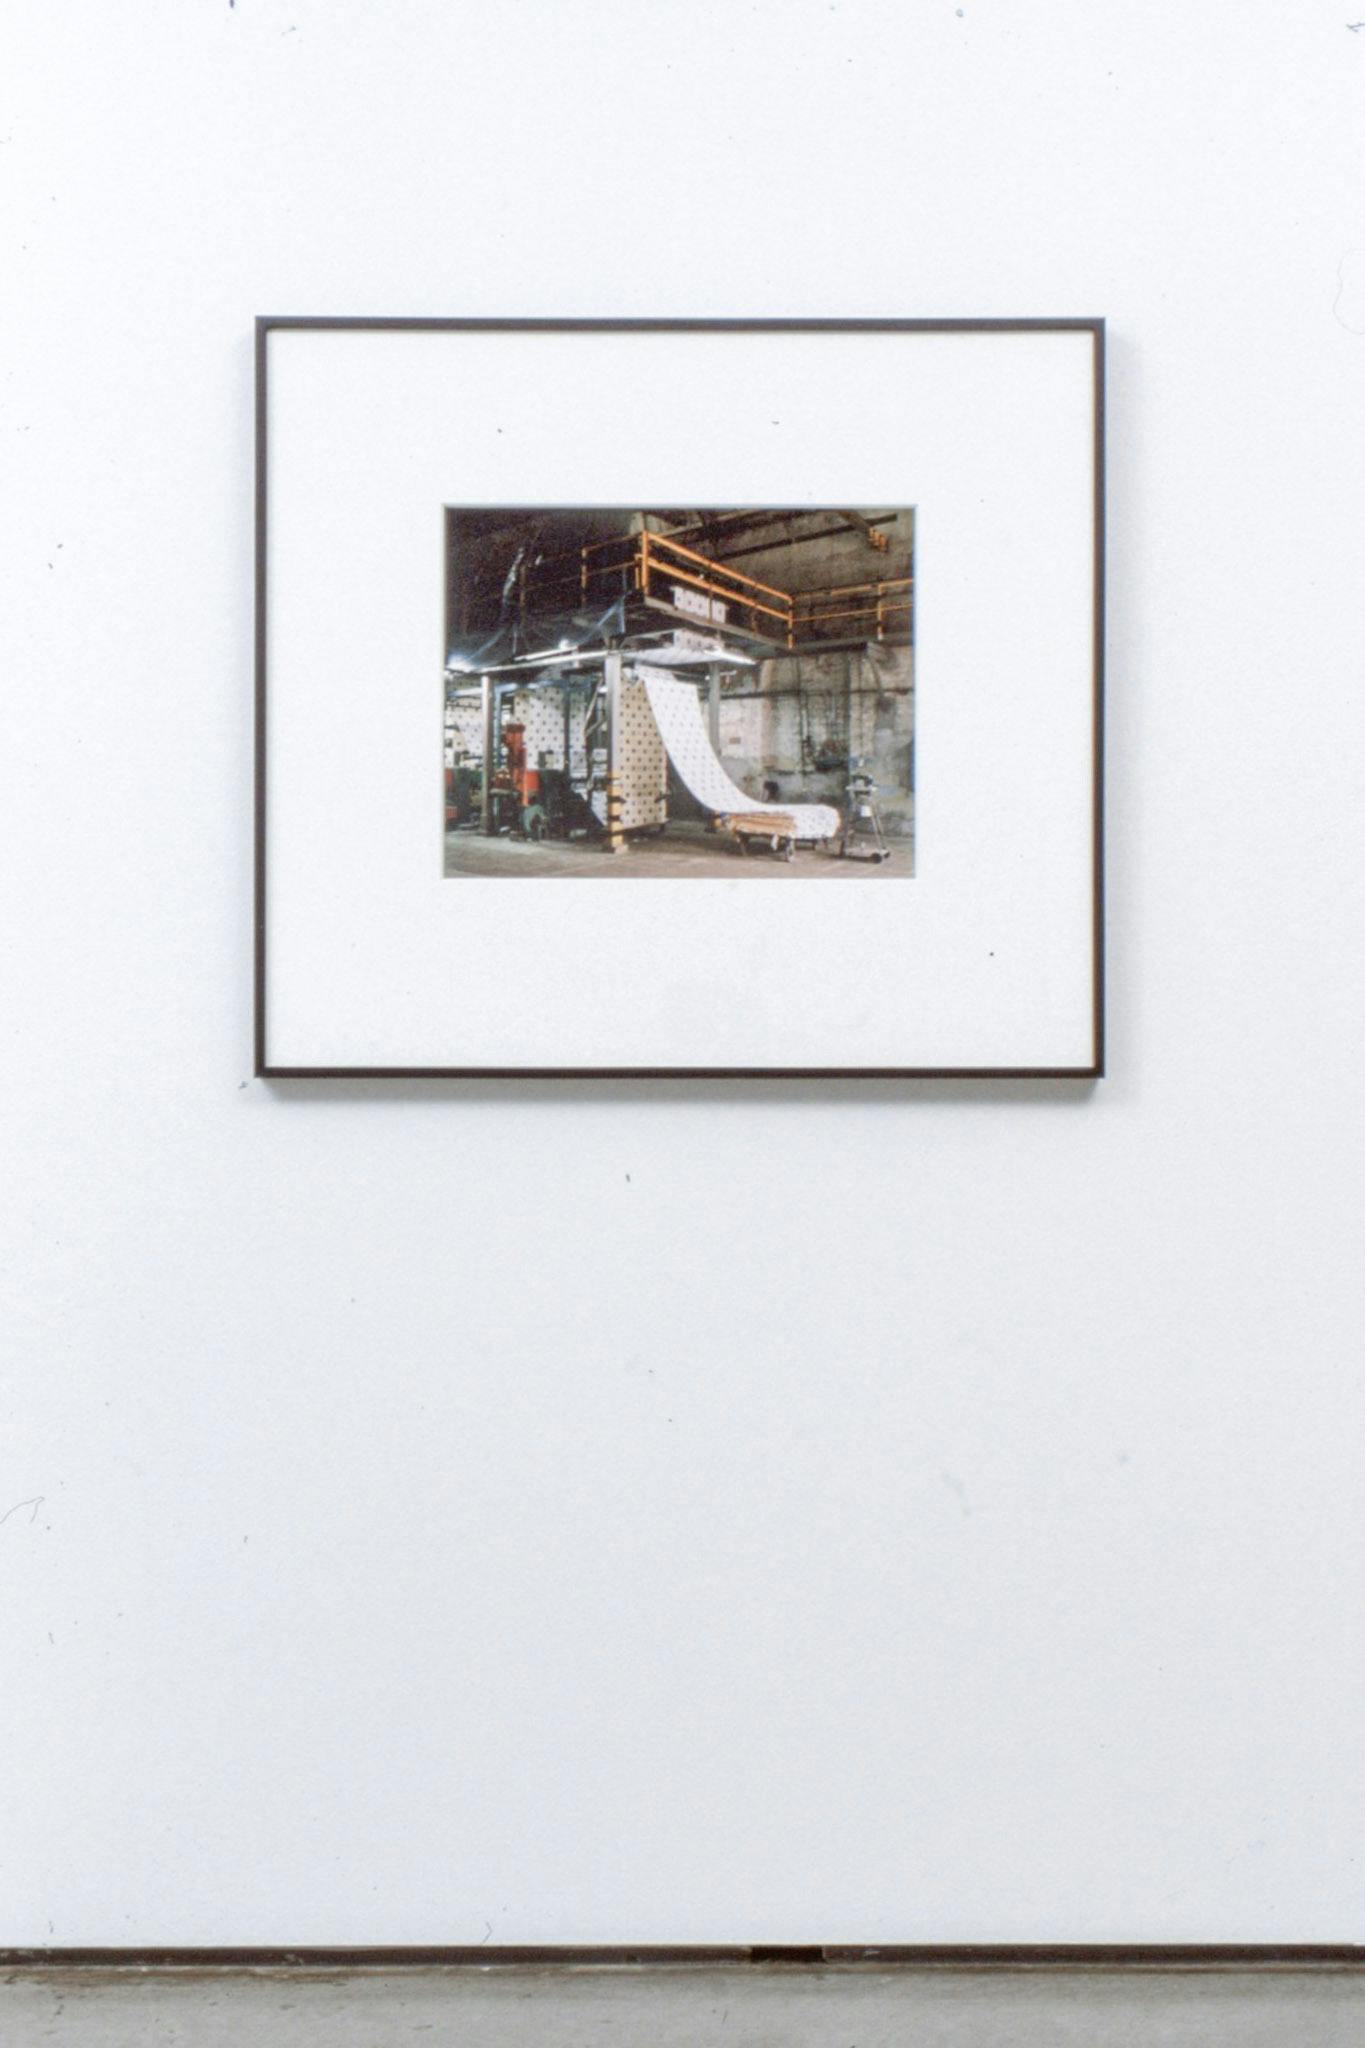 An install image of a photograph on a gallery wall. The photograph captures an industrial scene of machines lined up in a manufacturing firm creating one long sheet of white fabric or paper.